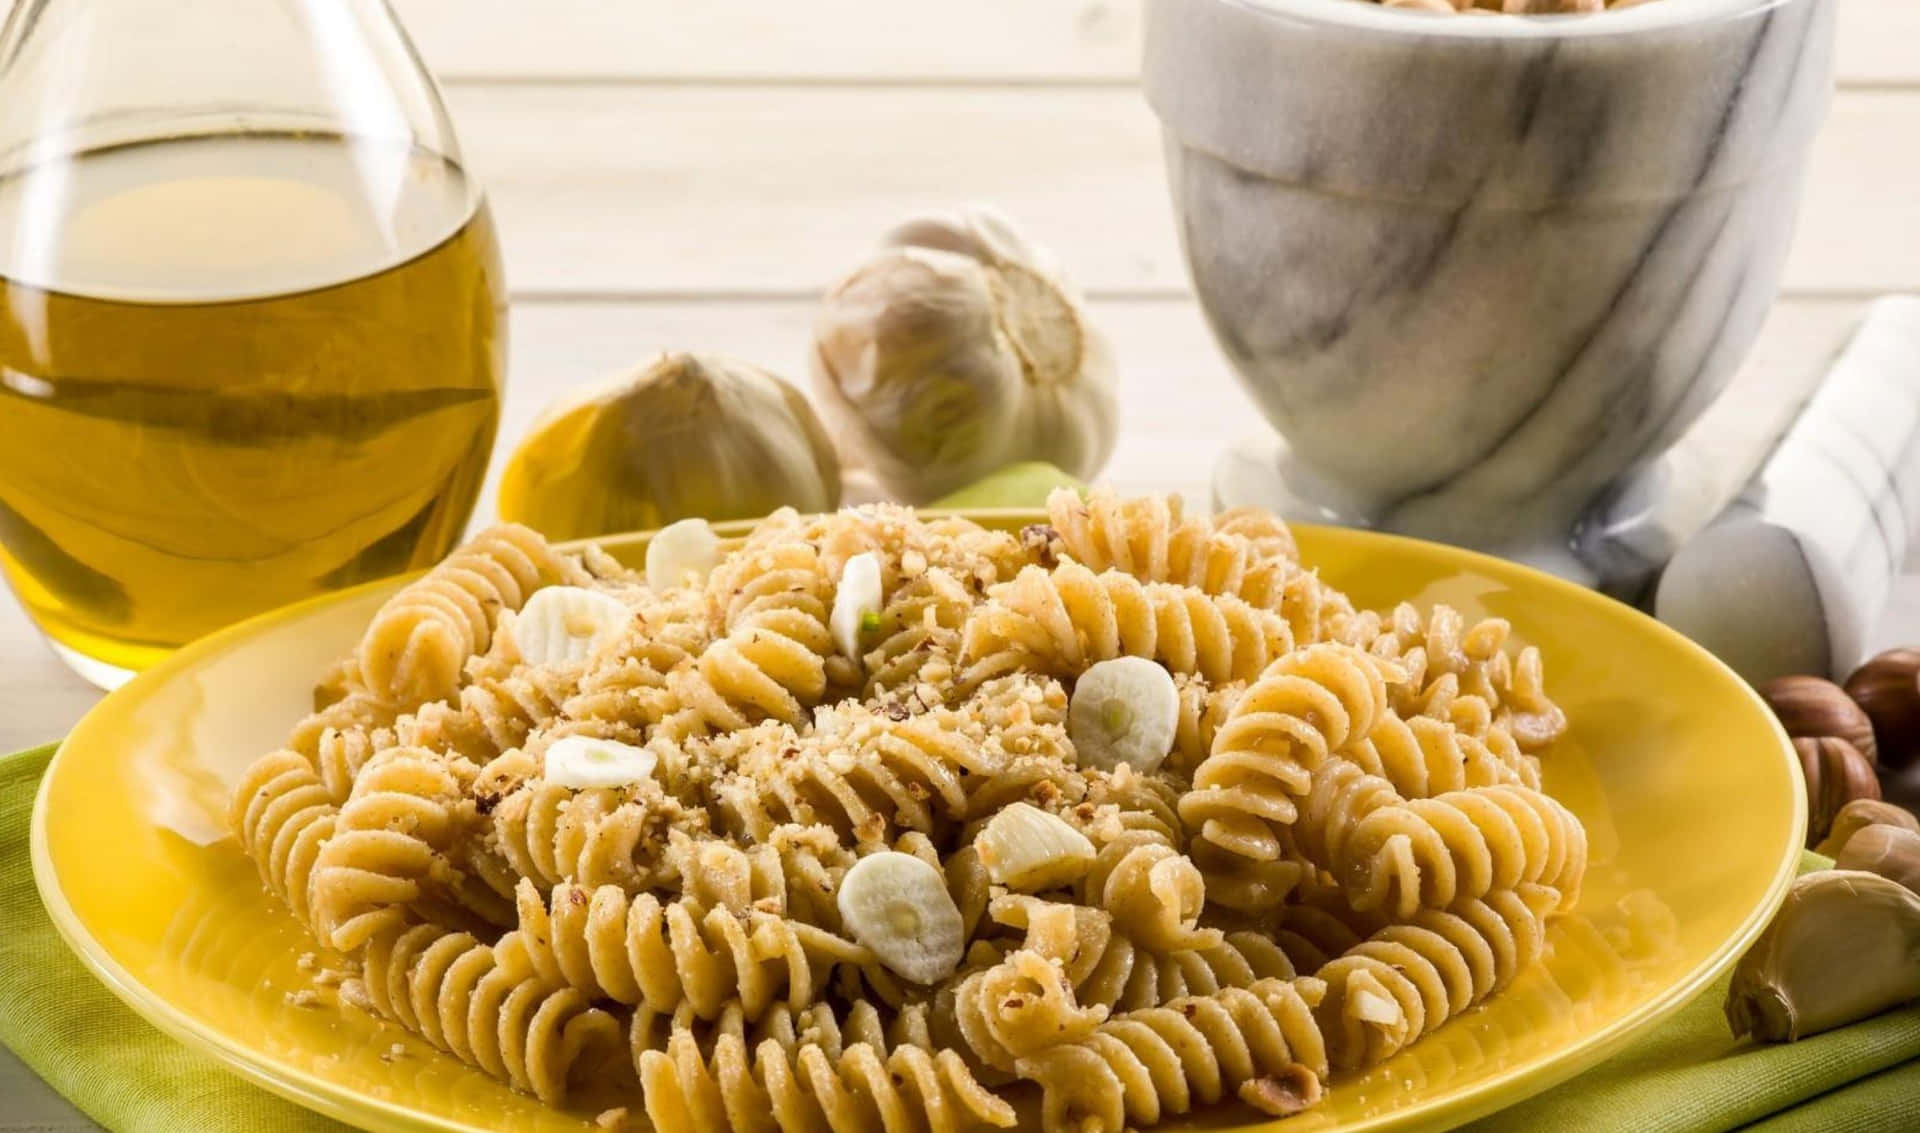 A Plate Of Pasta With Garlic And Nuts